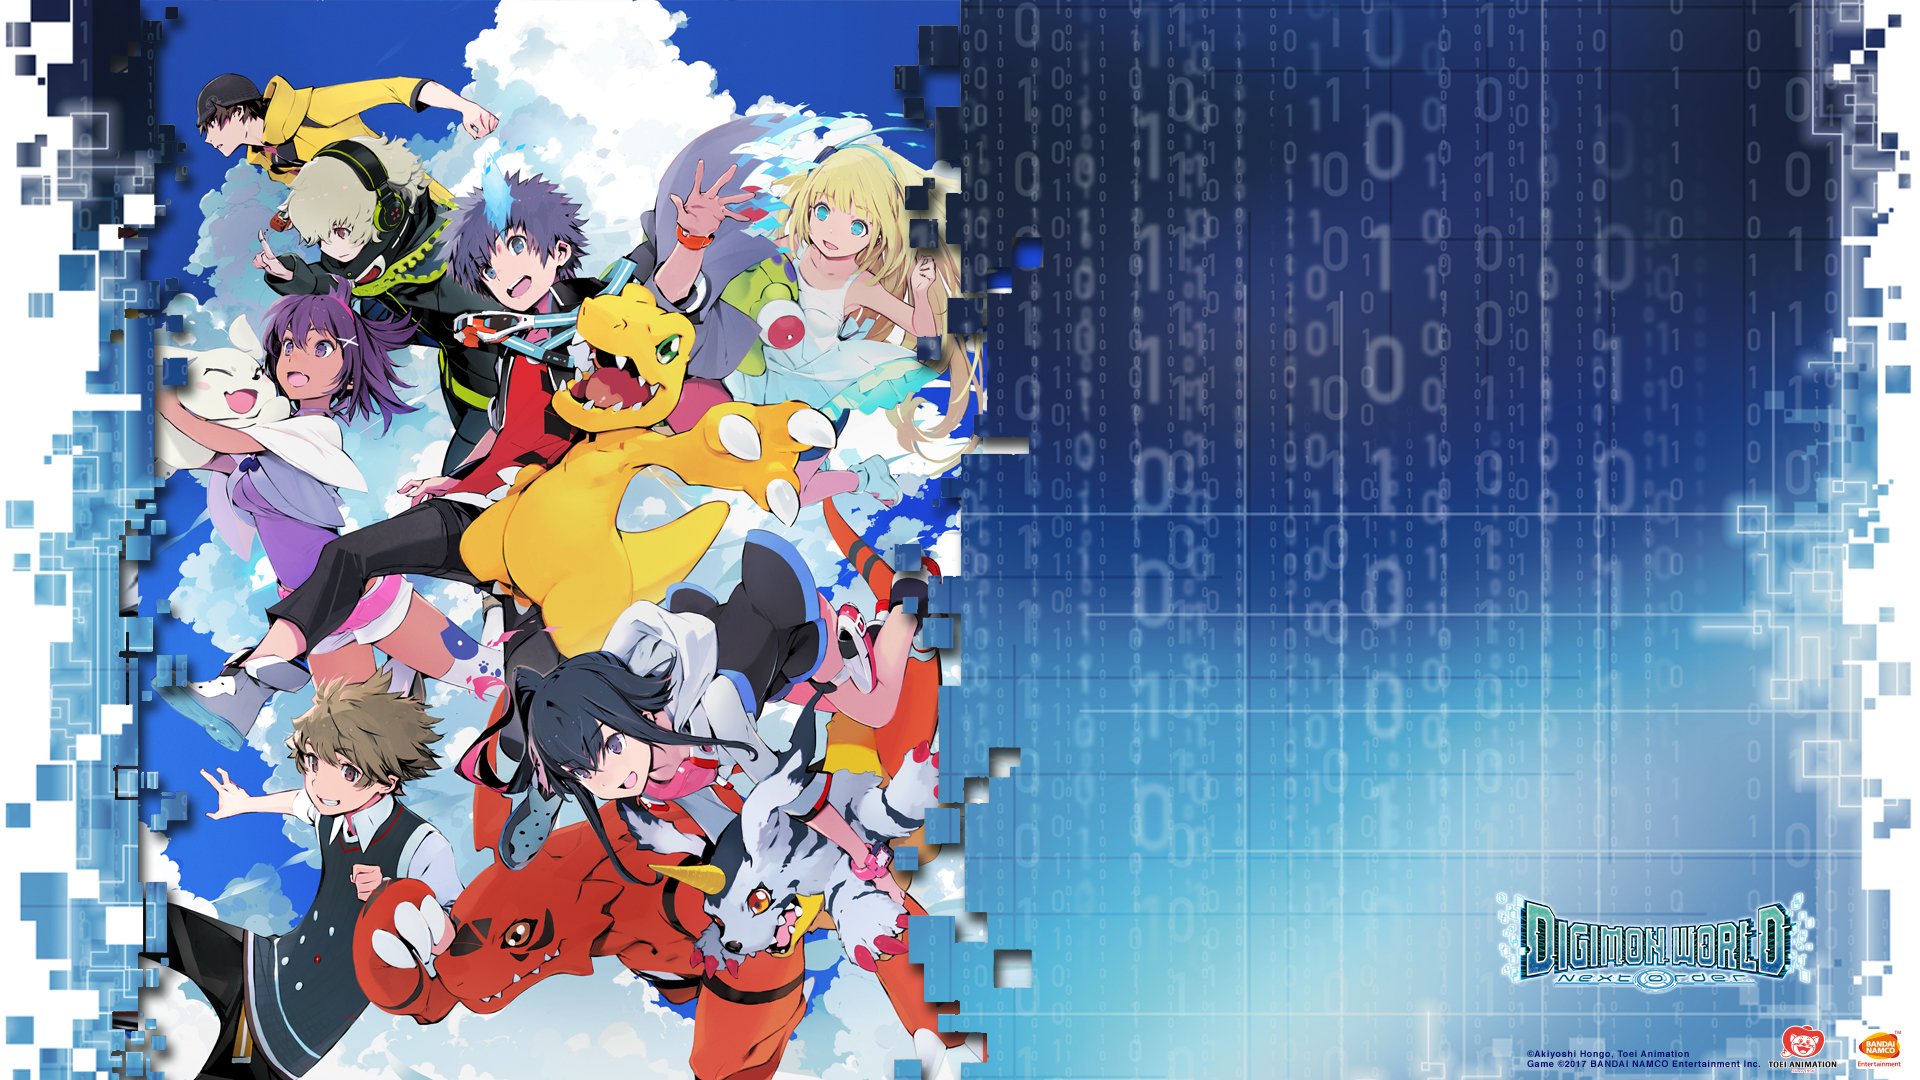 Next Order Avatars And Wallpaper Pack From Bandai Namco EU. With The Will // Digimon Forums